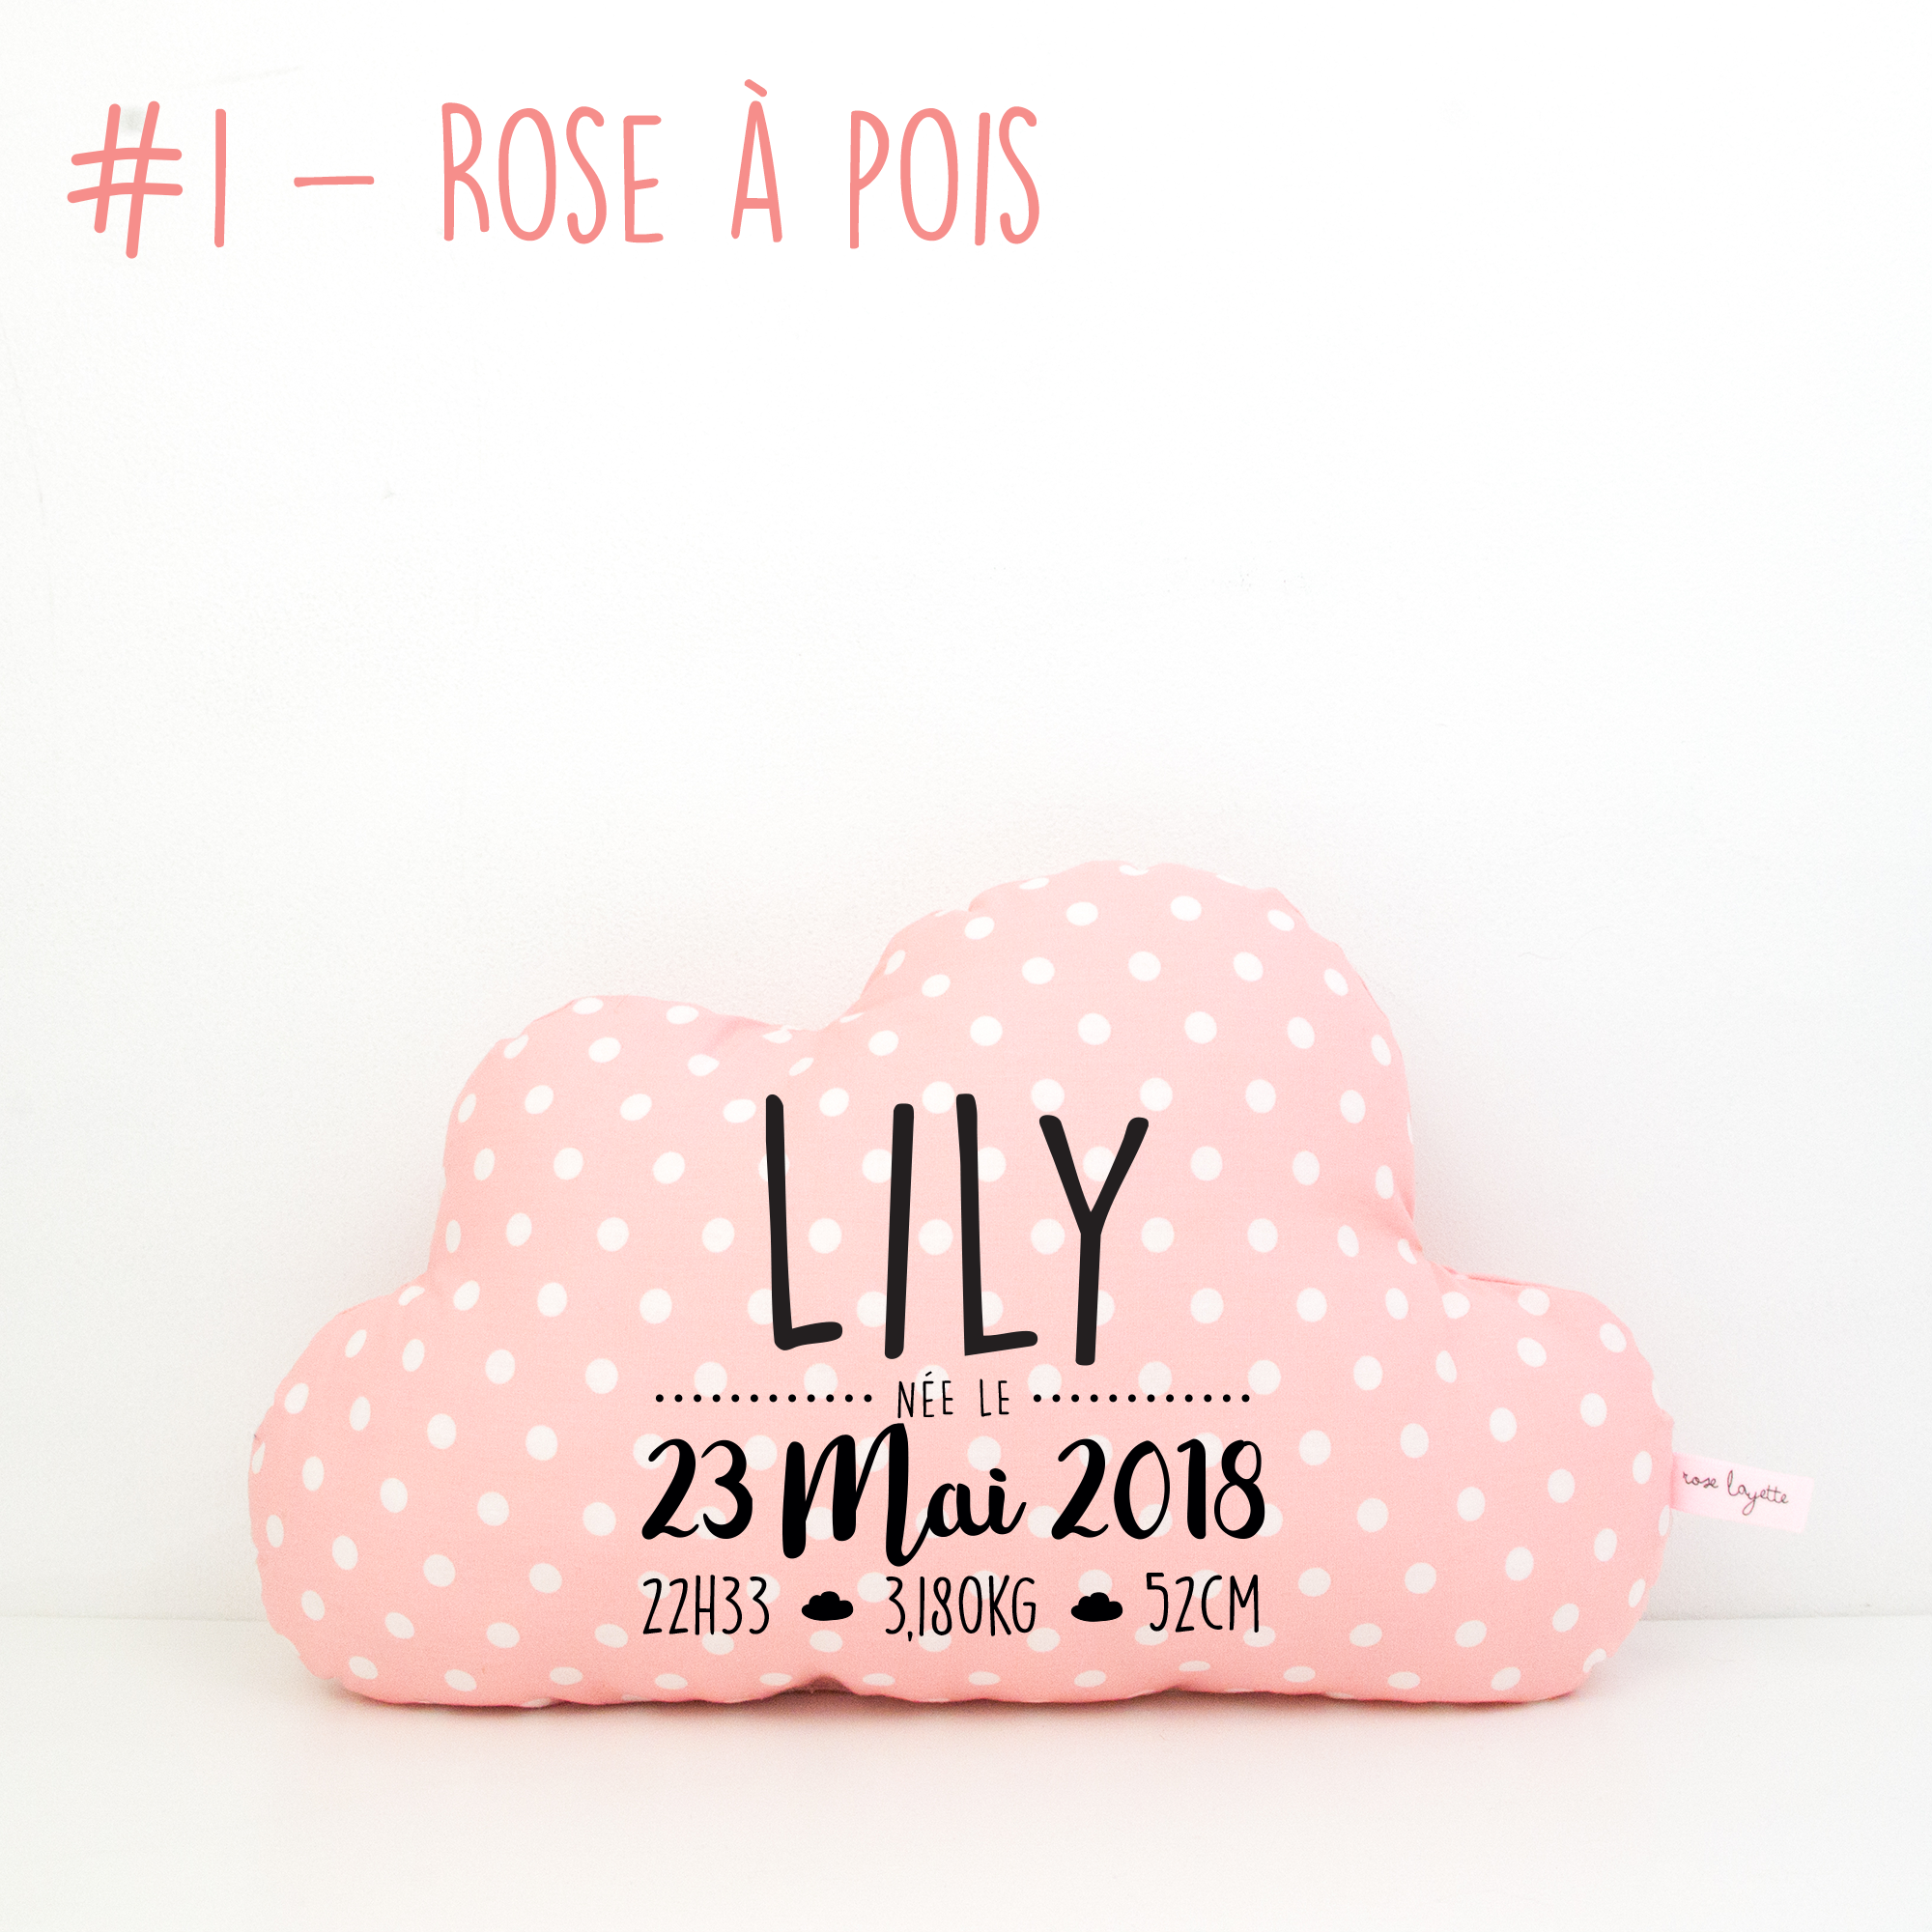 Coussin nuage rose